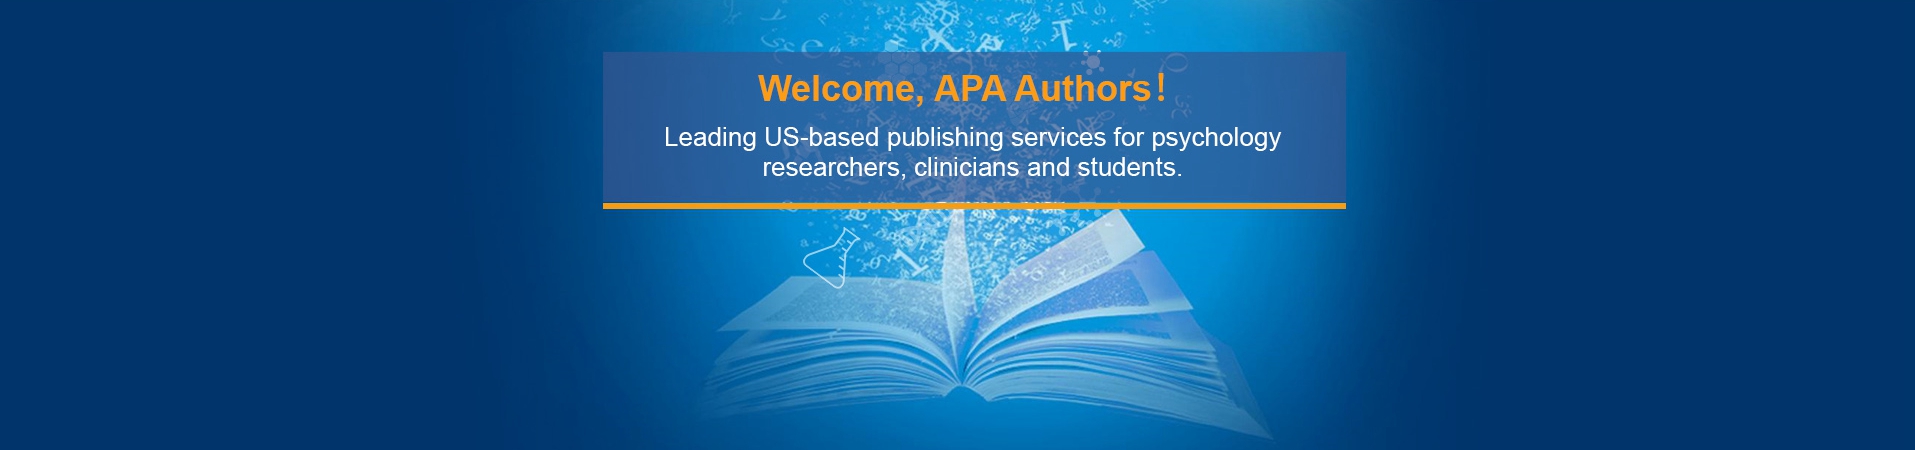 Welcome, APA authors! Leading US-based publishing services for psychology researches, clinicians, and students